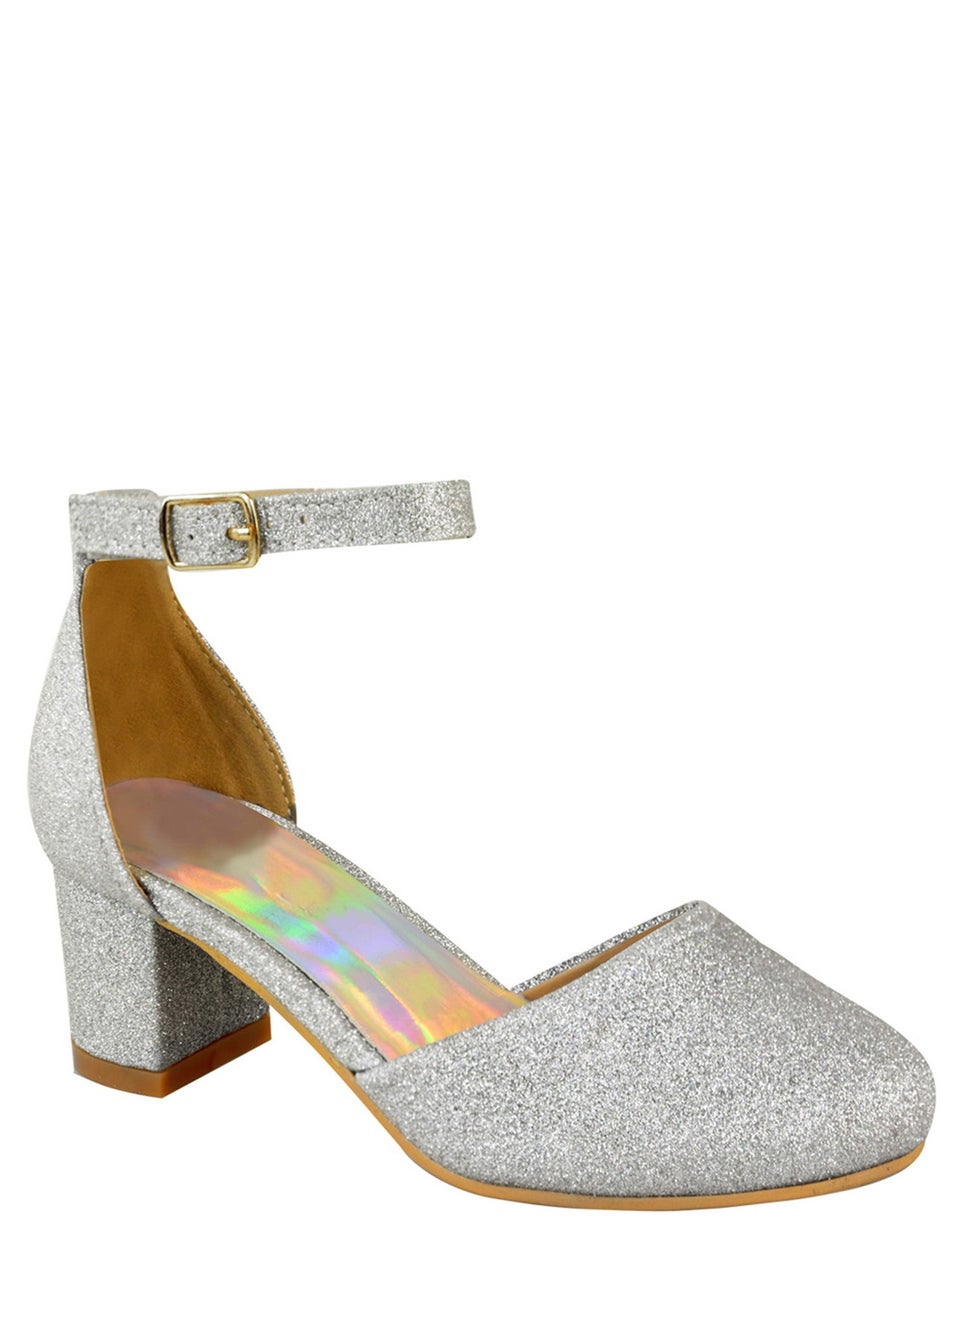 Where's That From Silver Glitter Abena Kids Mid Heel Sandals